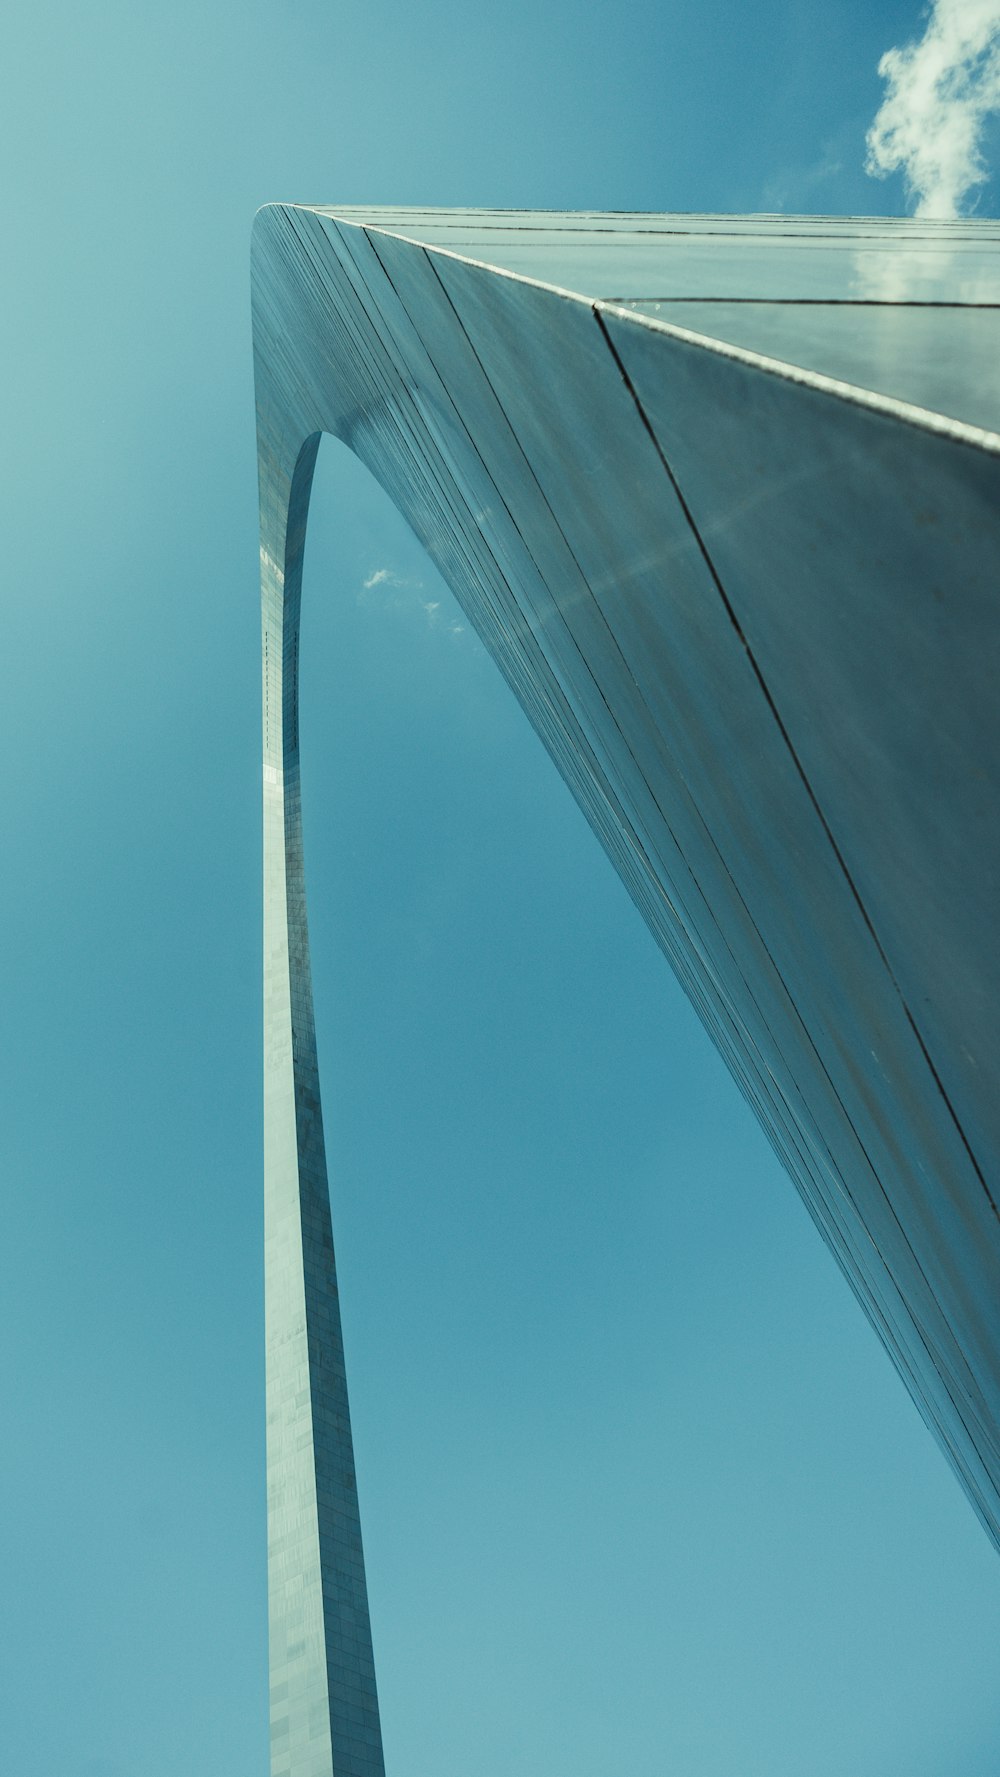 low angle photography of bridge under blue sky during daytime